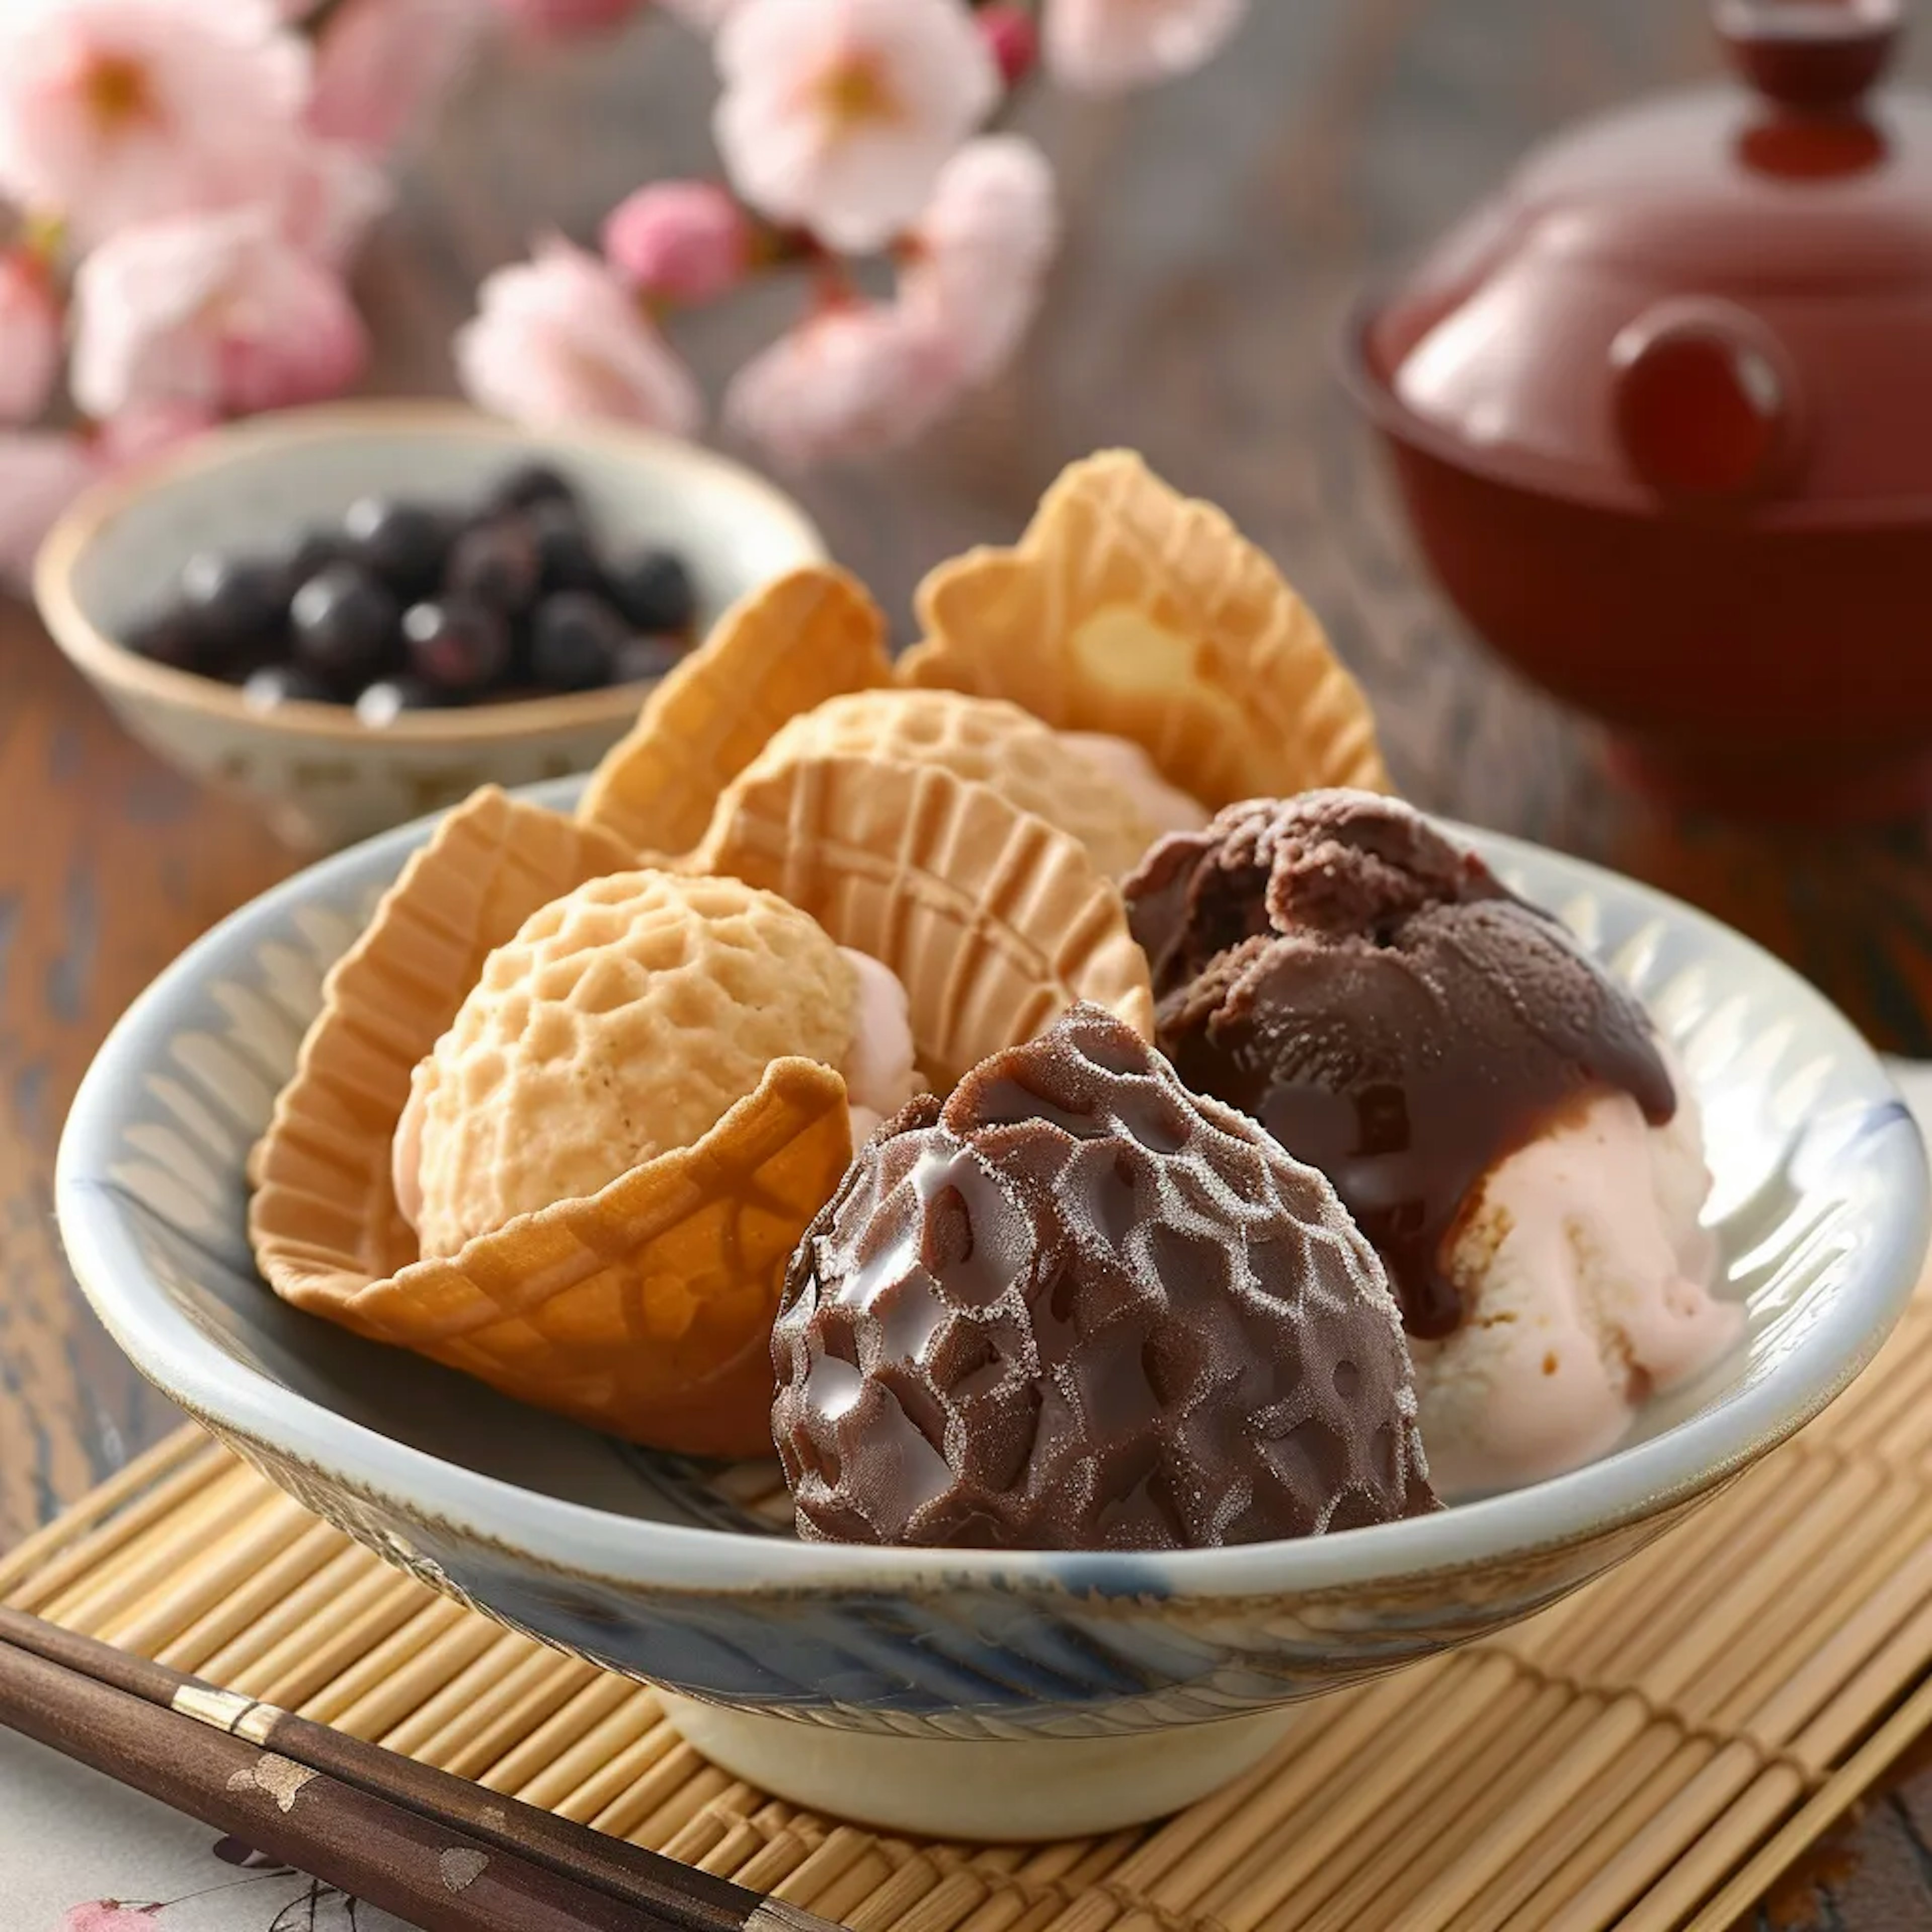 undefined-https://d3nrav7vo3lya8.cloudfront.net/profile_photos/japanese-sweets/65p.webp